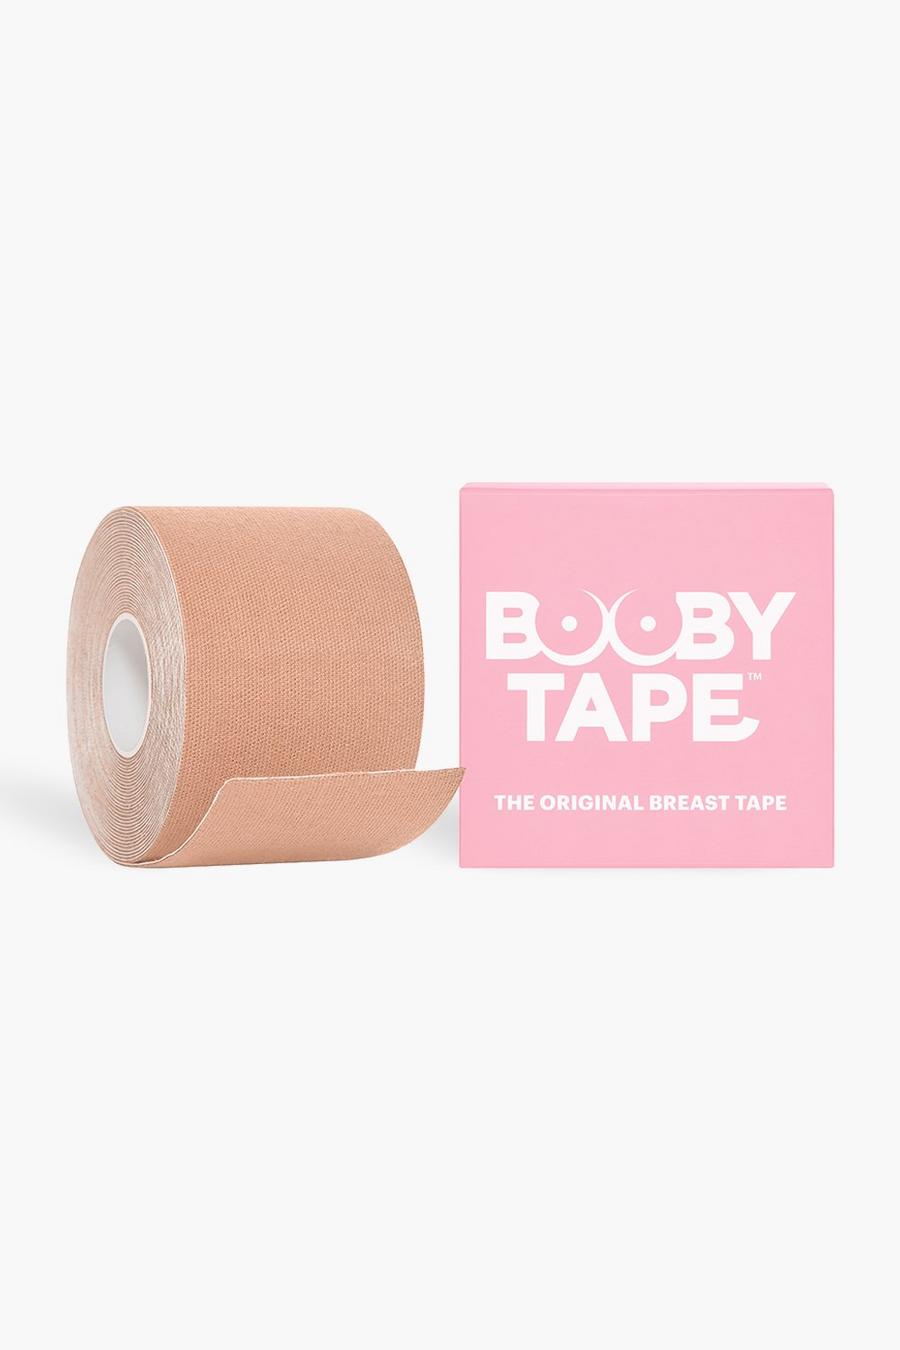 Booby-Tape Nude 5m Rolle , Hautfarben nude image number 1